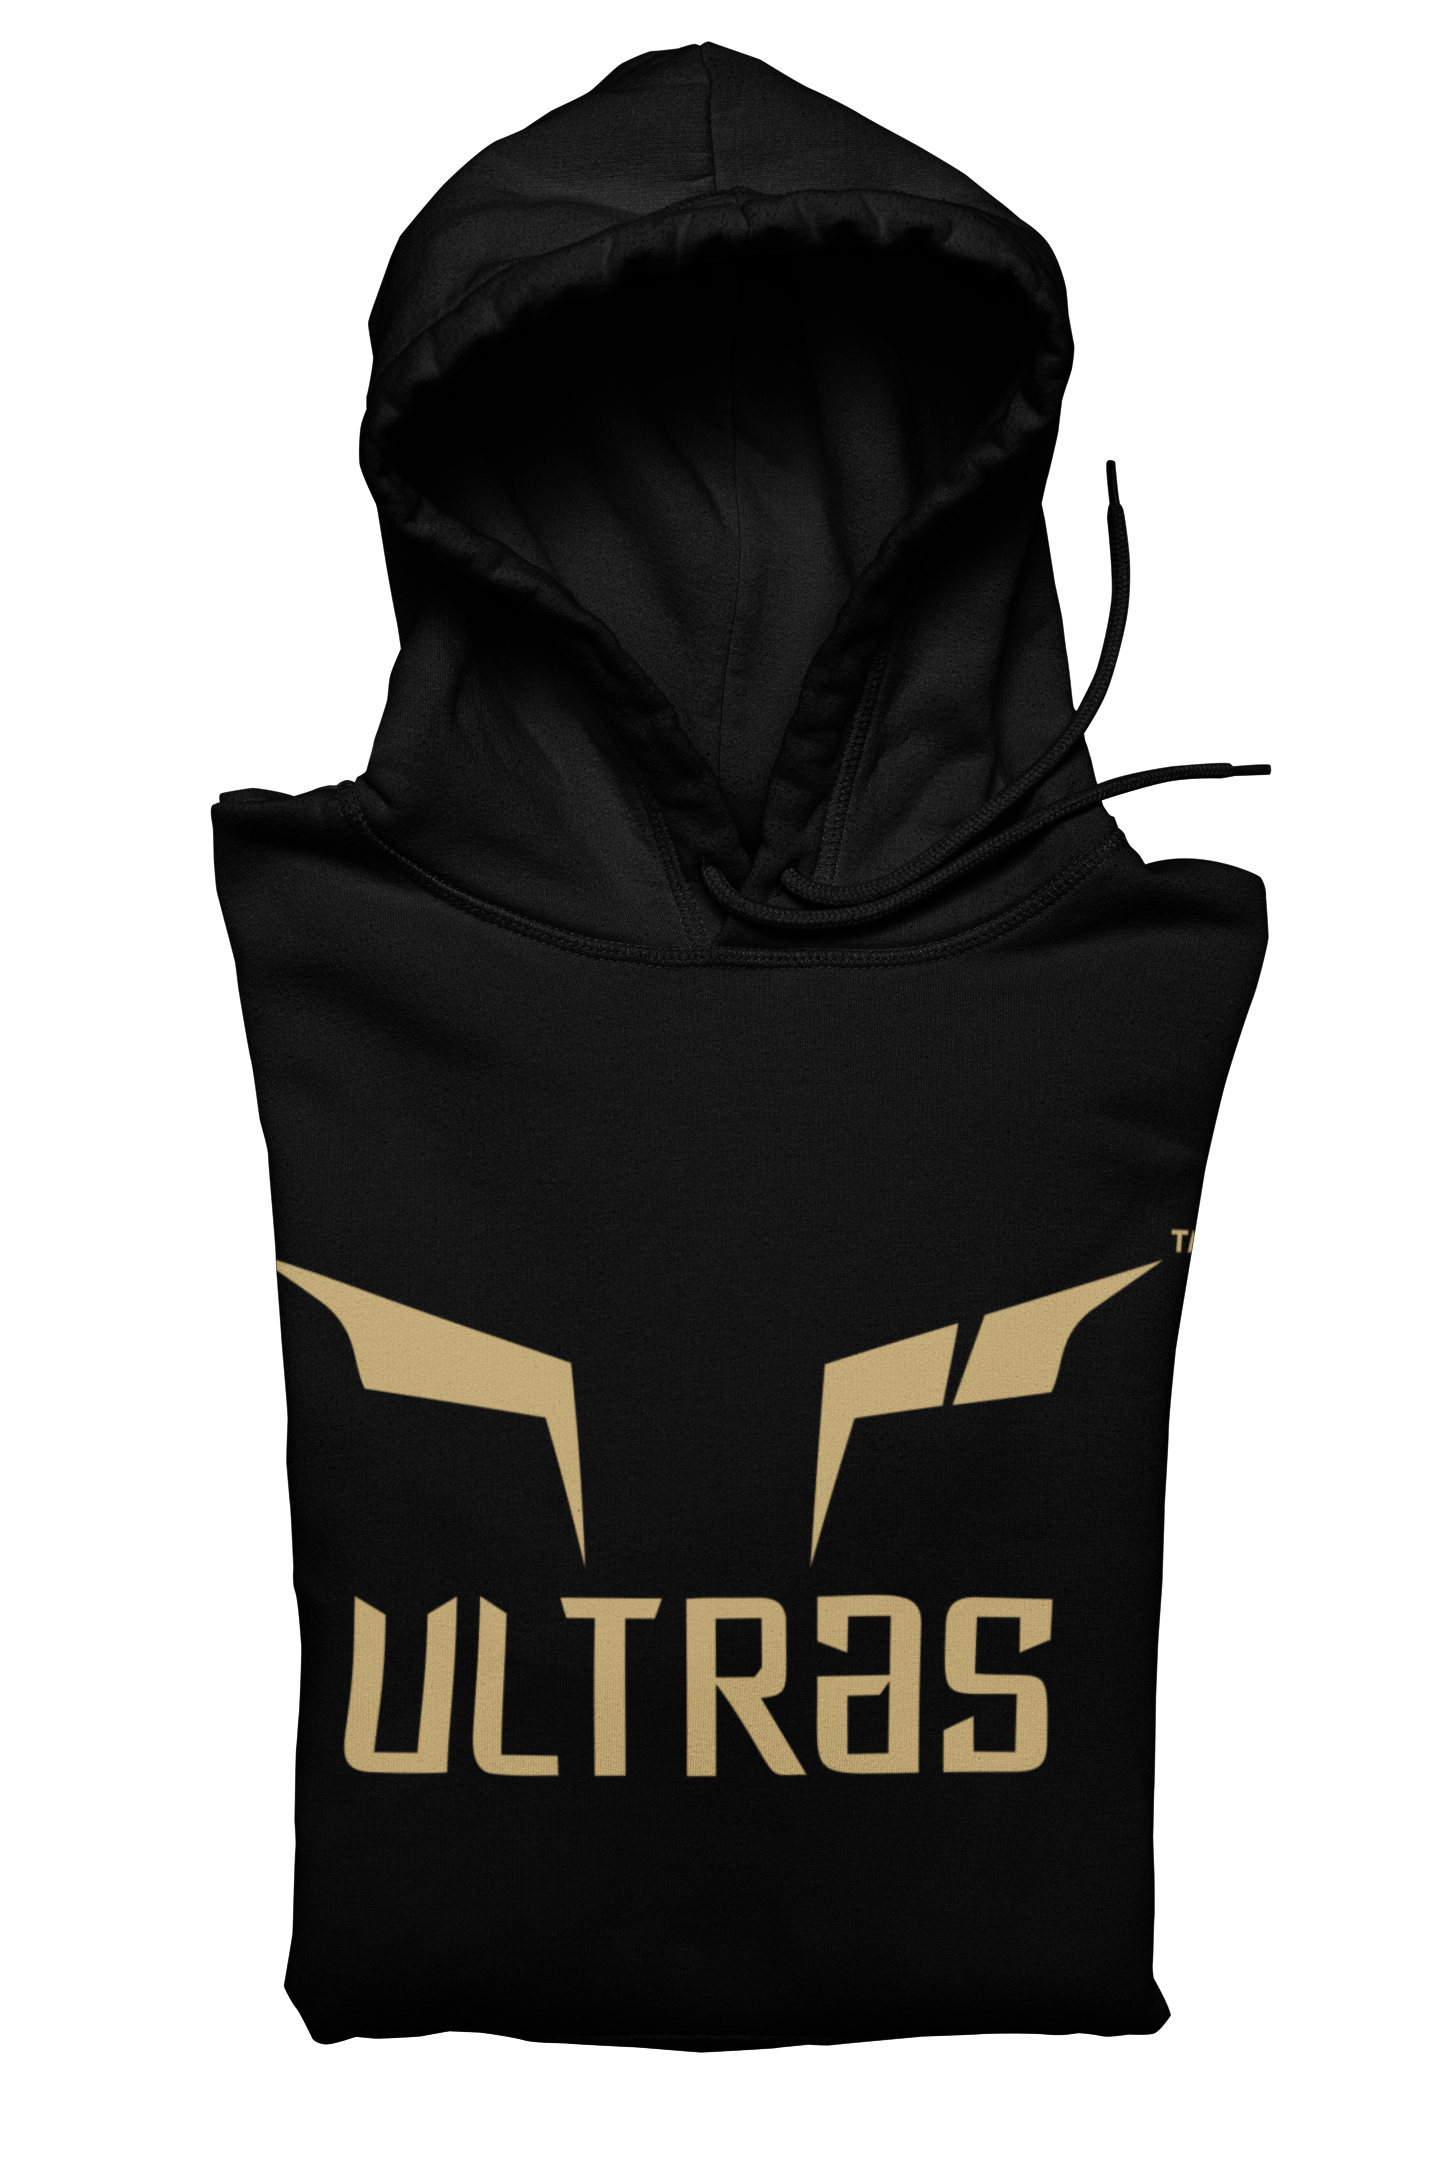 Indian Ultras - Classic Gold Hoodie